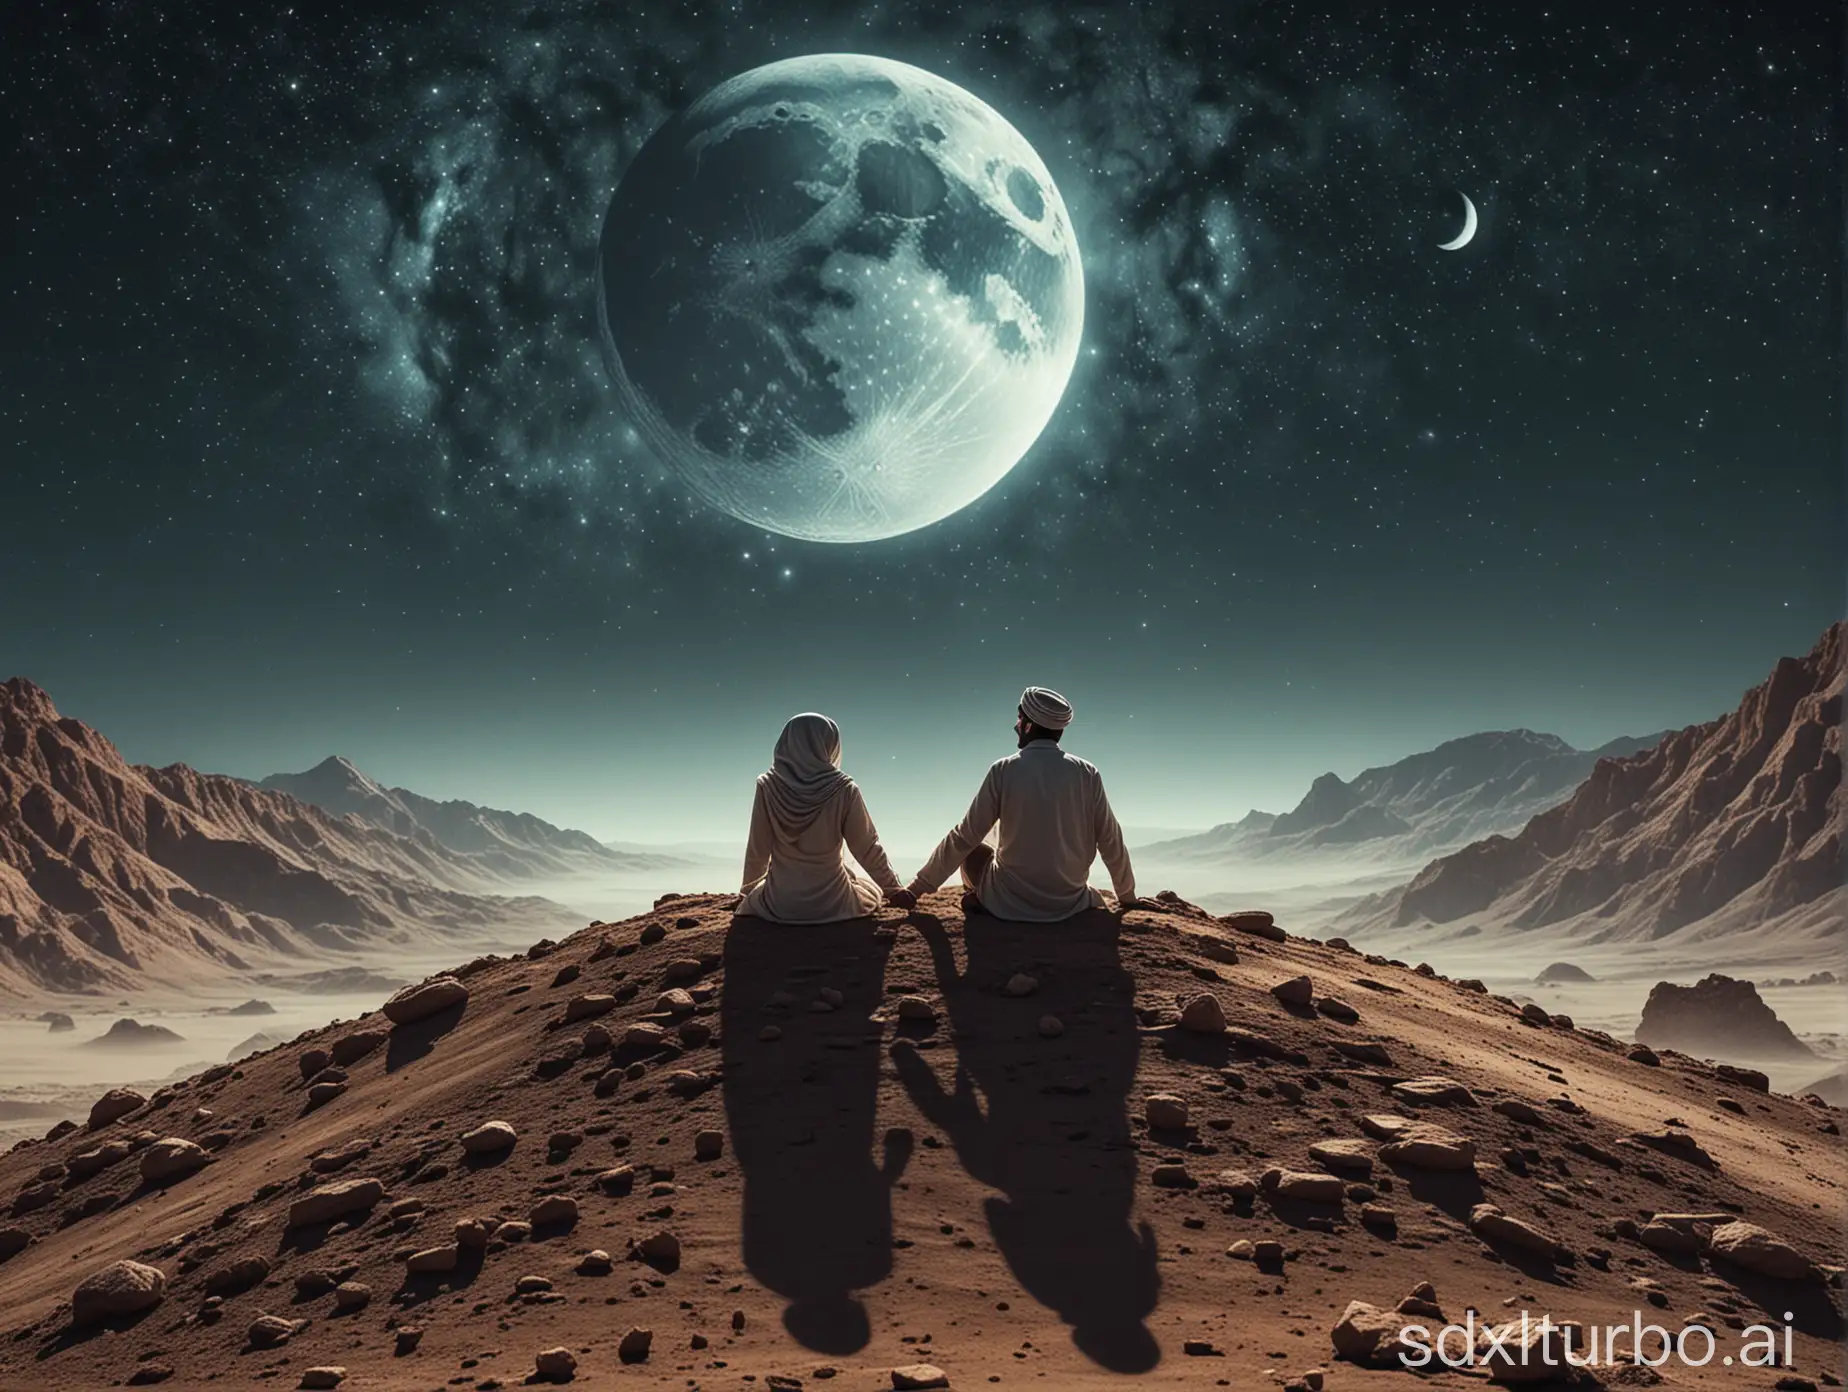 Magical scene of iranian couple on moon , stylize the best on your idea but maintain core prompt